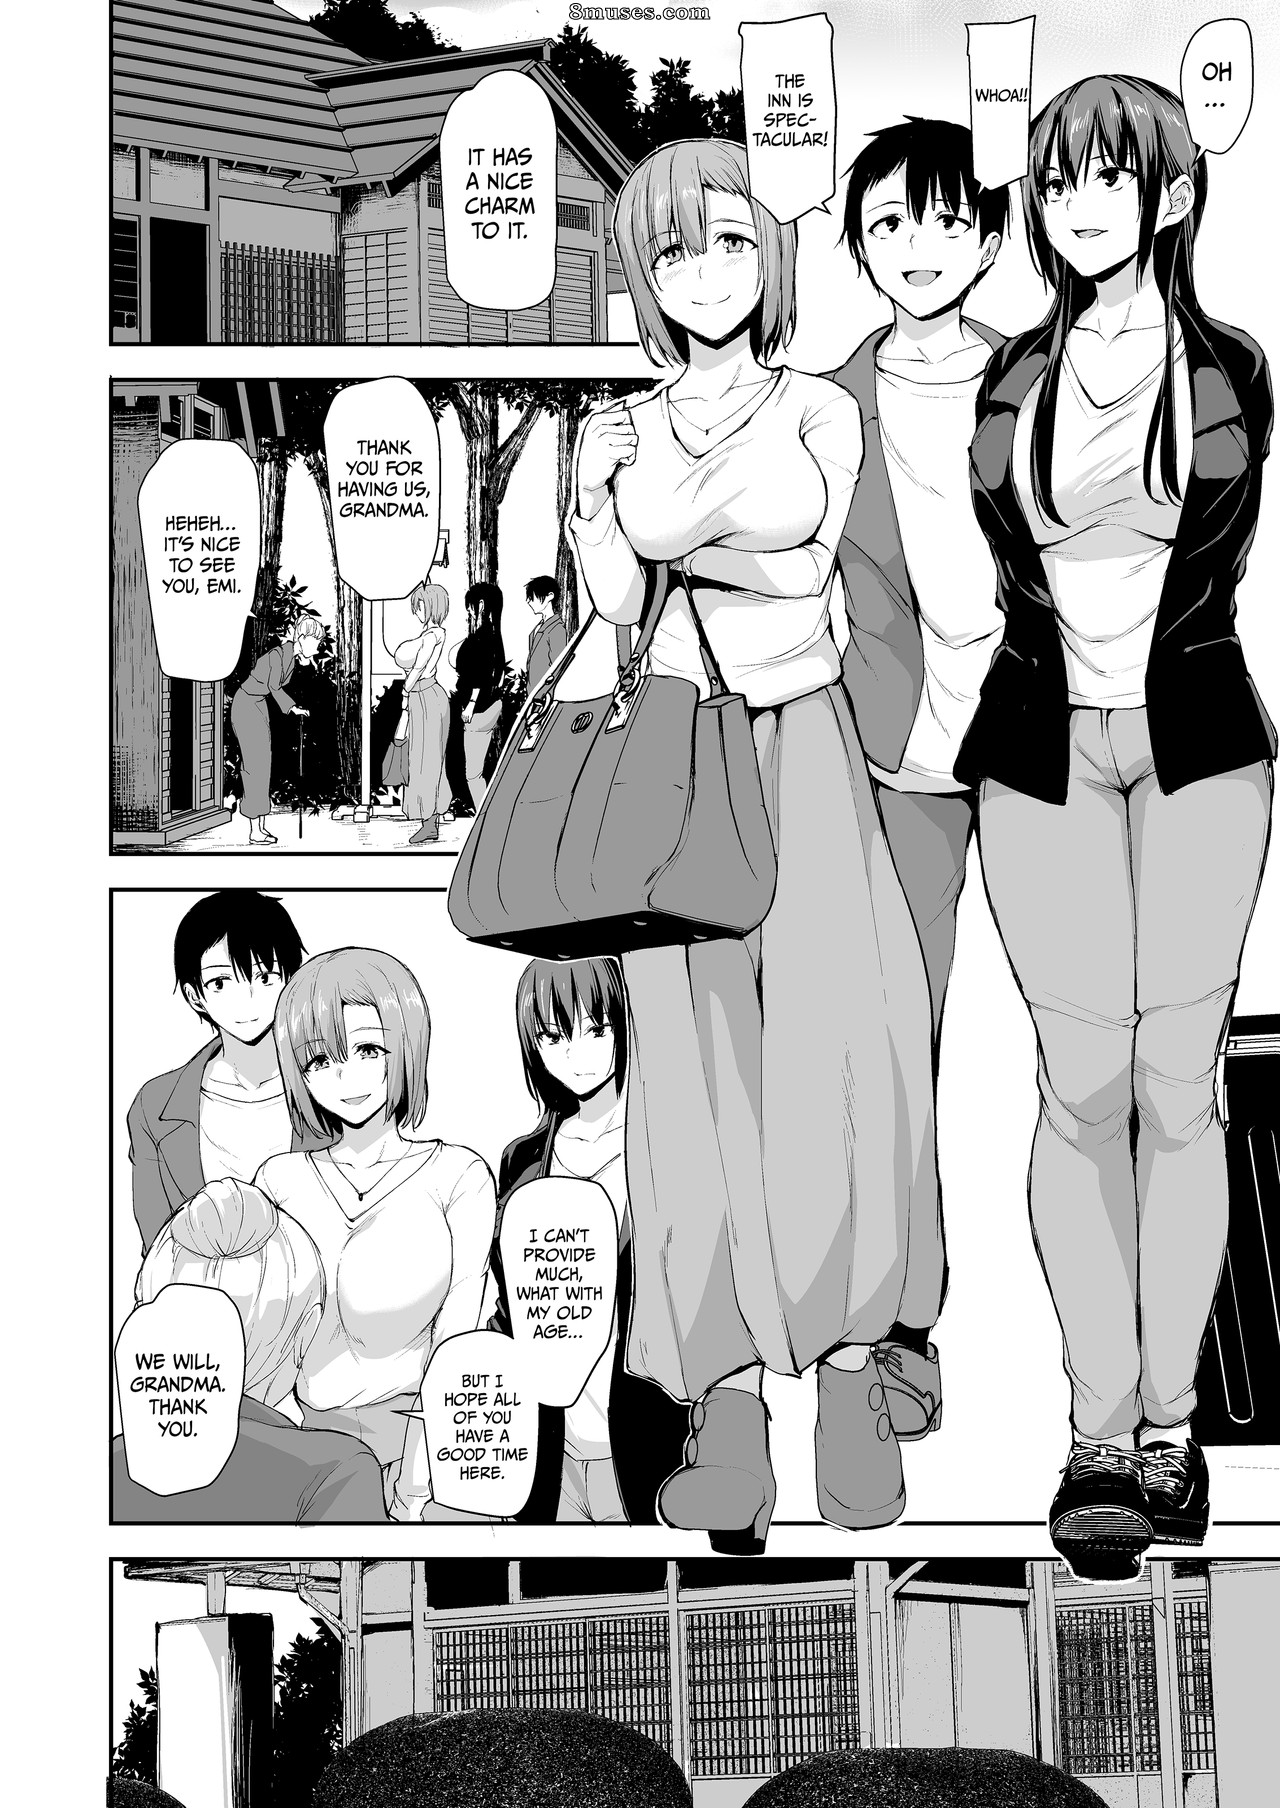 Page 5 Fakku-Comics/SHIMA-PAN-Tachibana-Omina/I-Cant-Get-it-Up-Without-Two-Pairs-of-Big-Breasts-So- My-Wife-Brought-Her-Friend-2 8muses photo